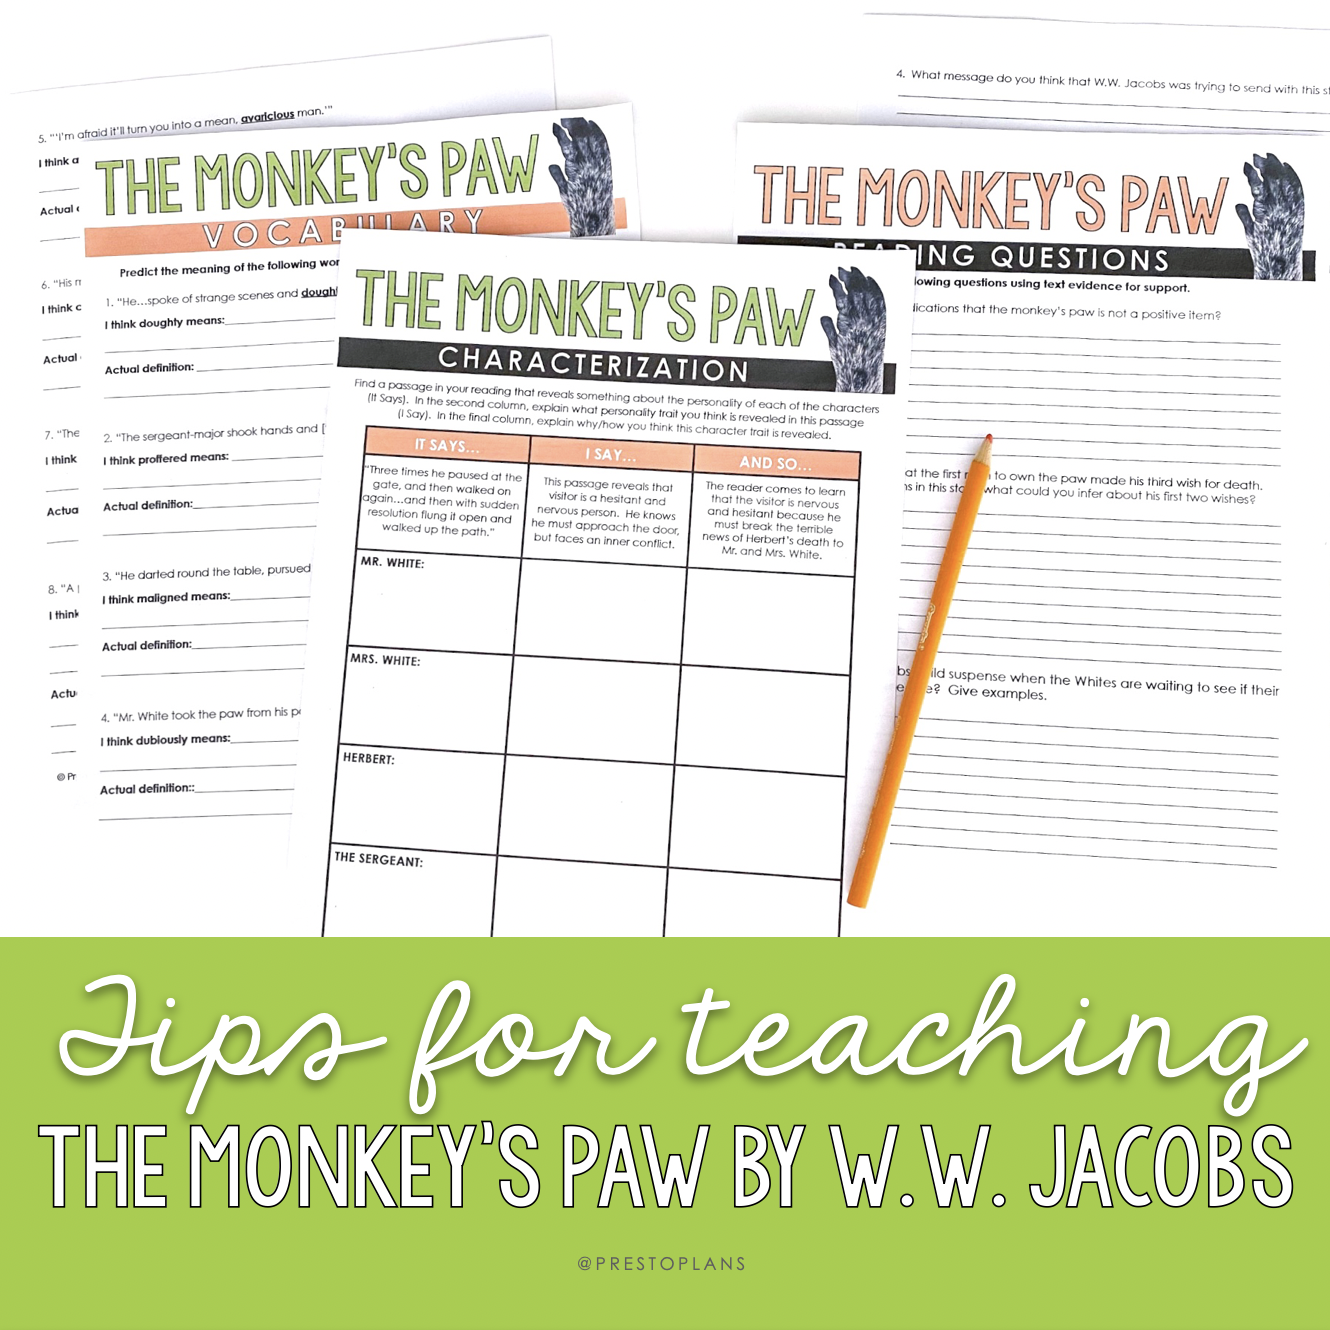 Tips and resources for teaching "The Monkey's Paw by W.W. Jacobs